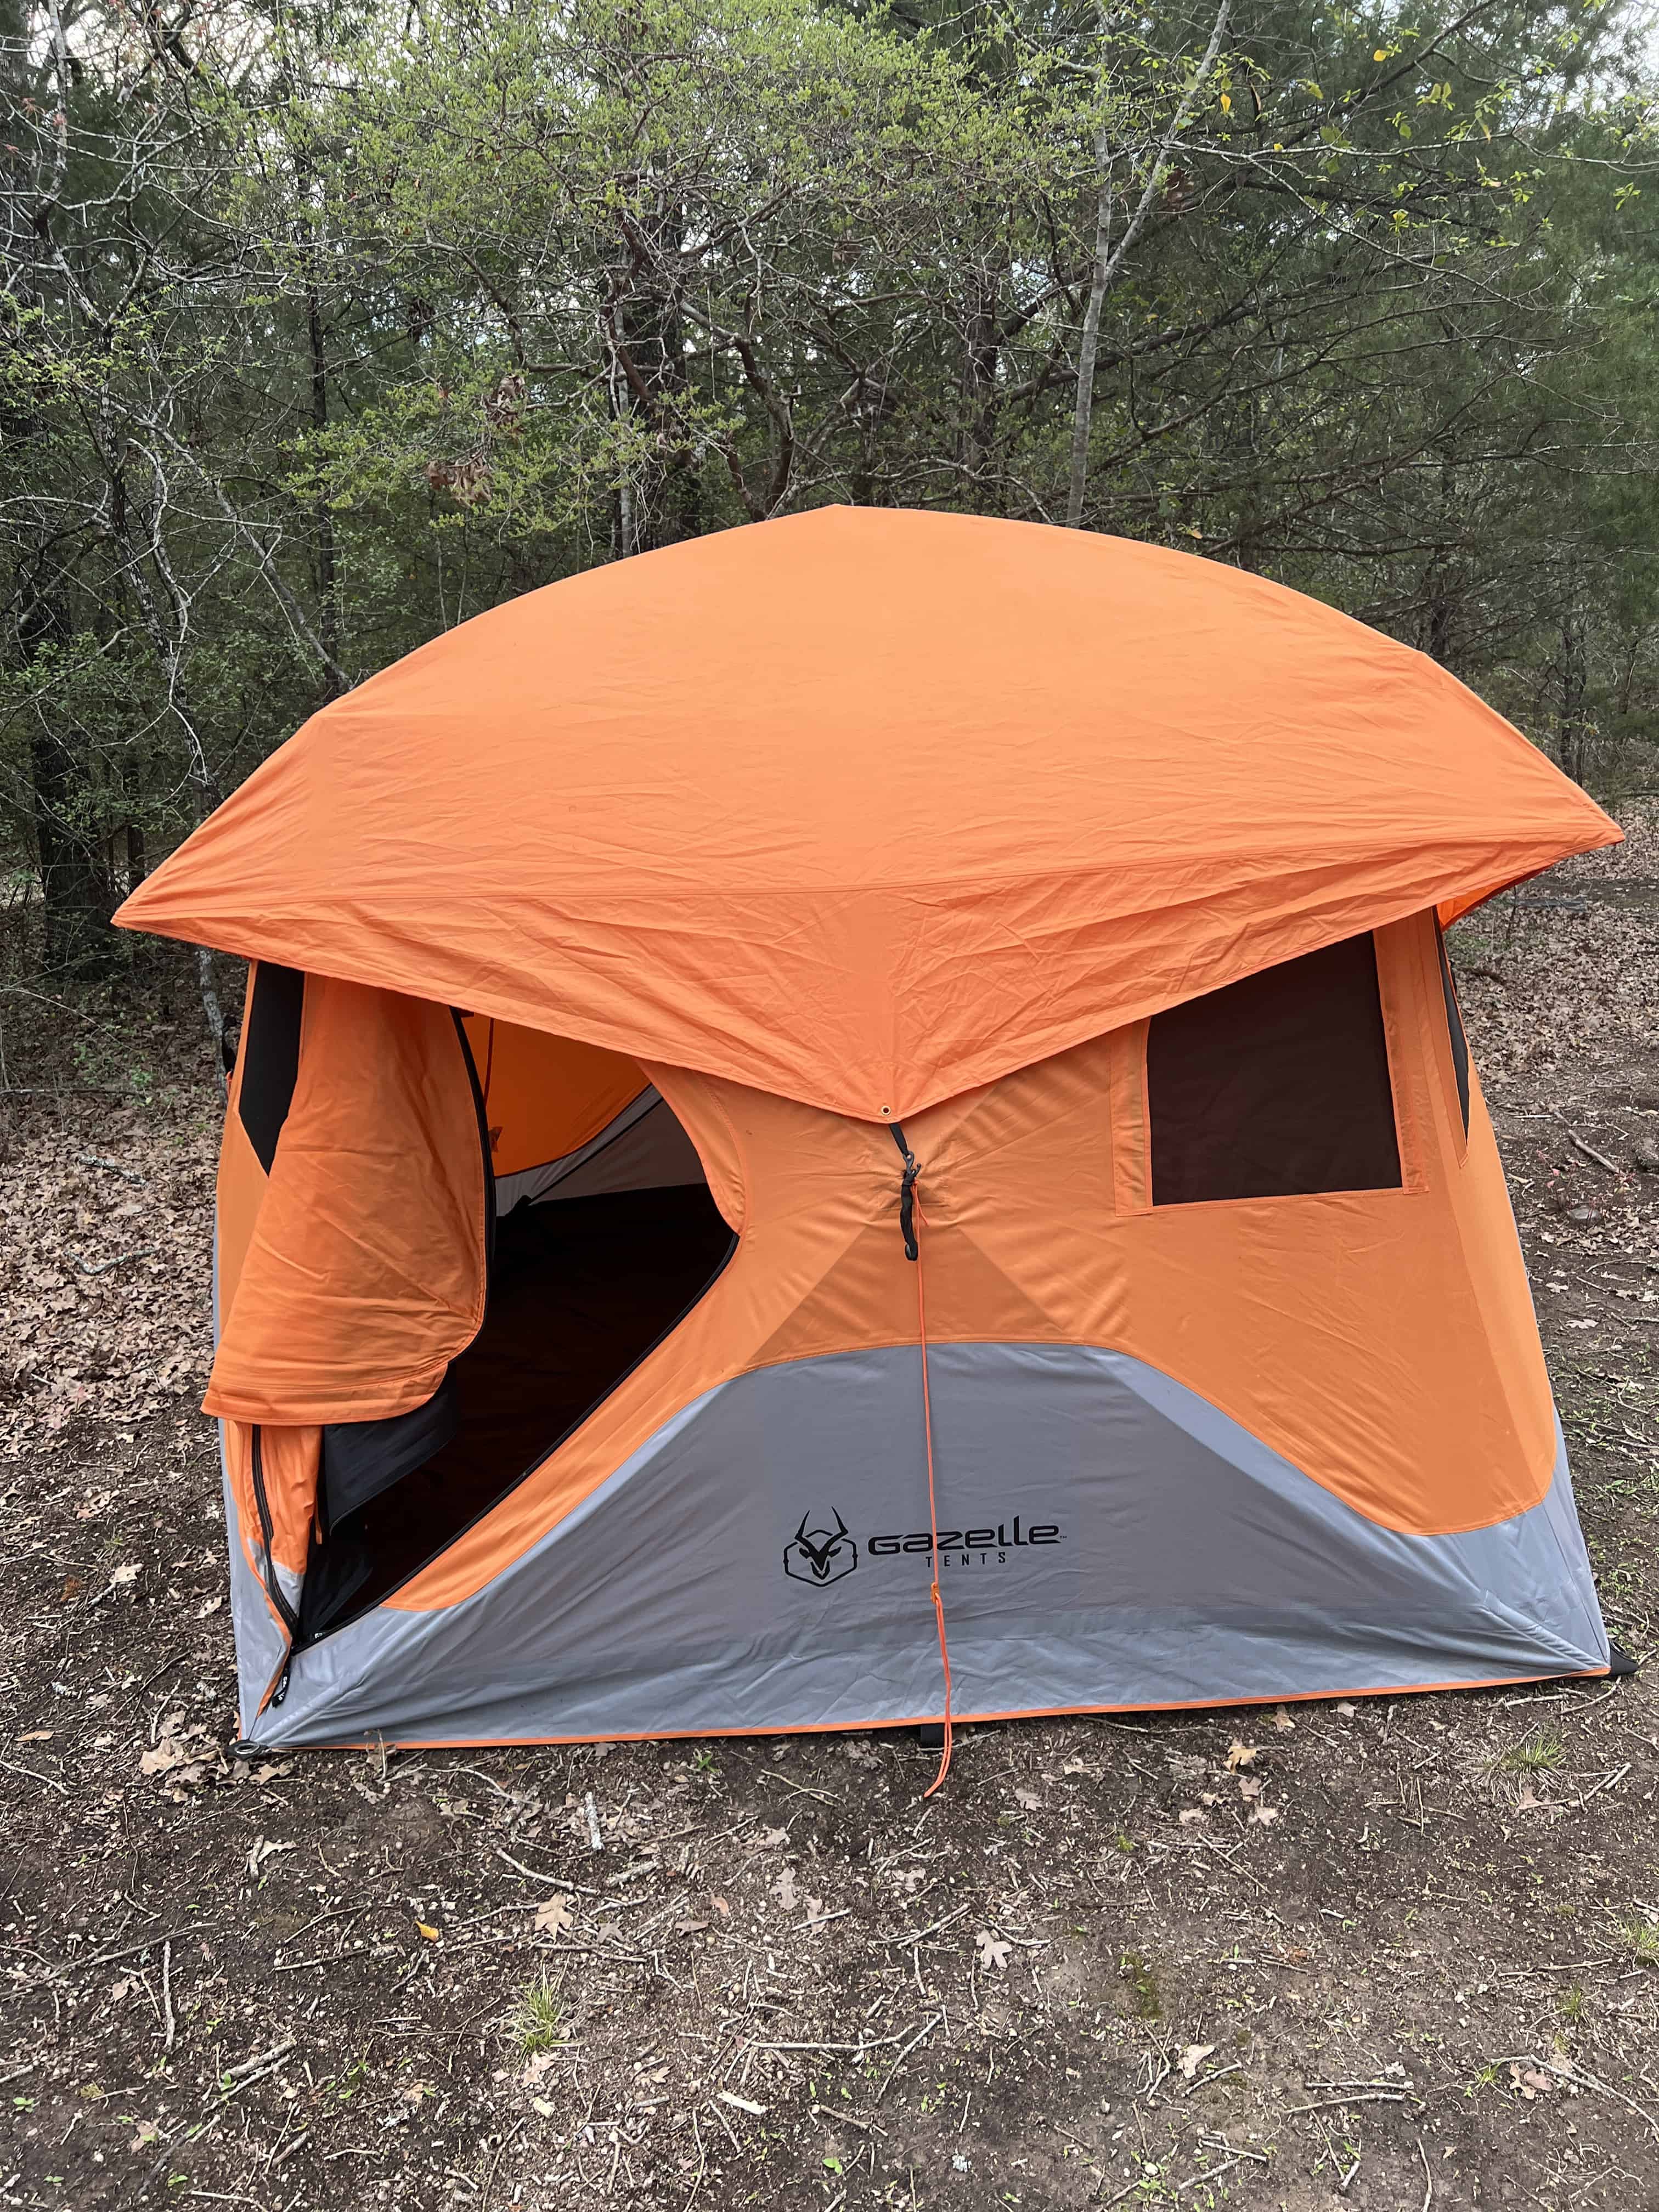 Gazelle T4 tent at a campground